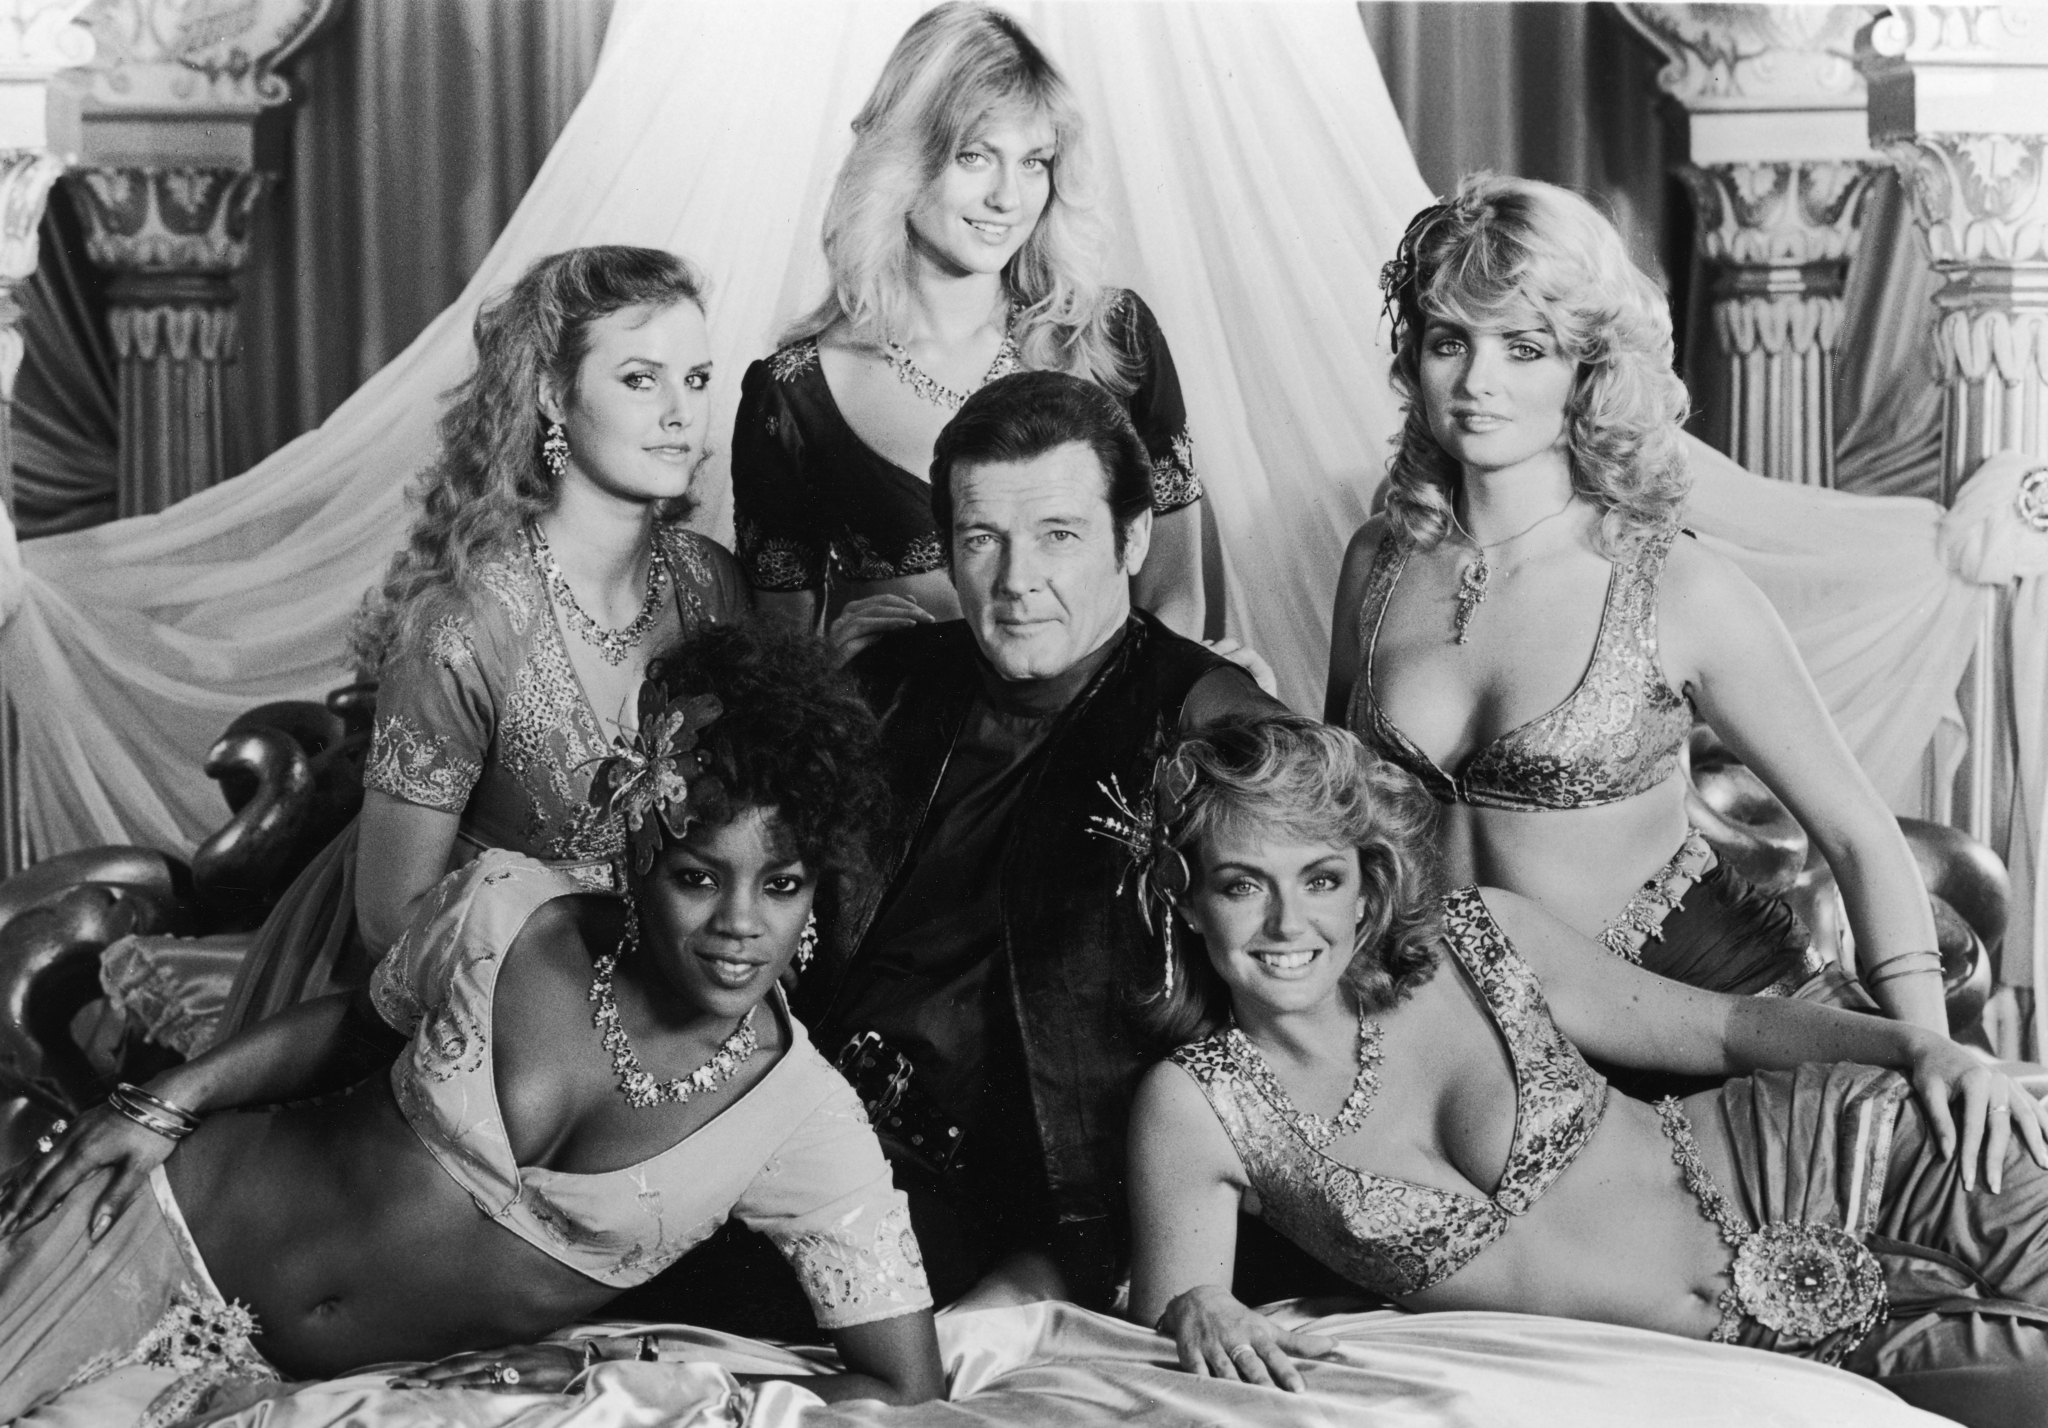 Roger Moore, Carole Ashby, Gillian De Terville, Carolyn Seaward, Mary Stavin and Tina Robinson at event of Astuonkoje (1983)